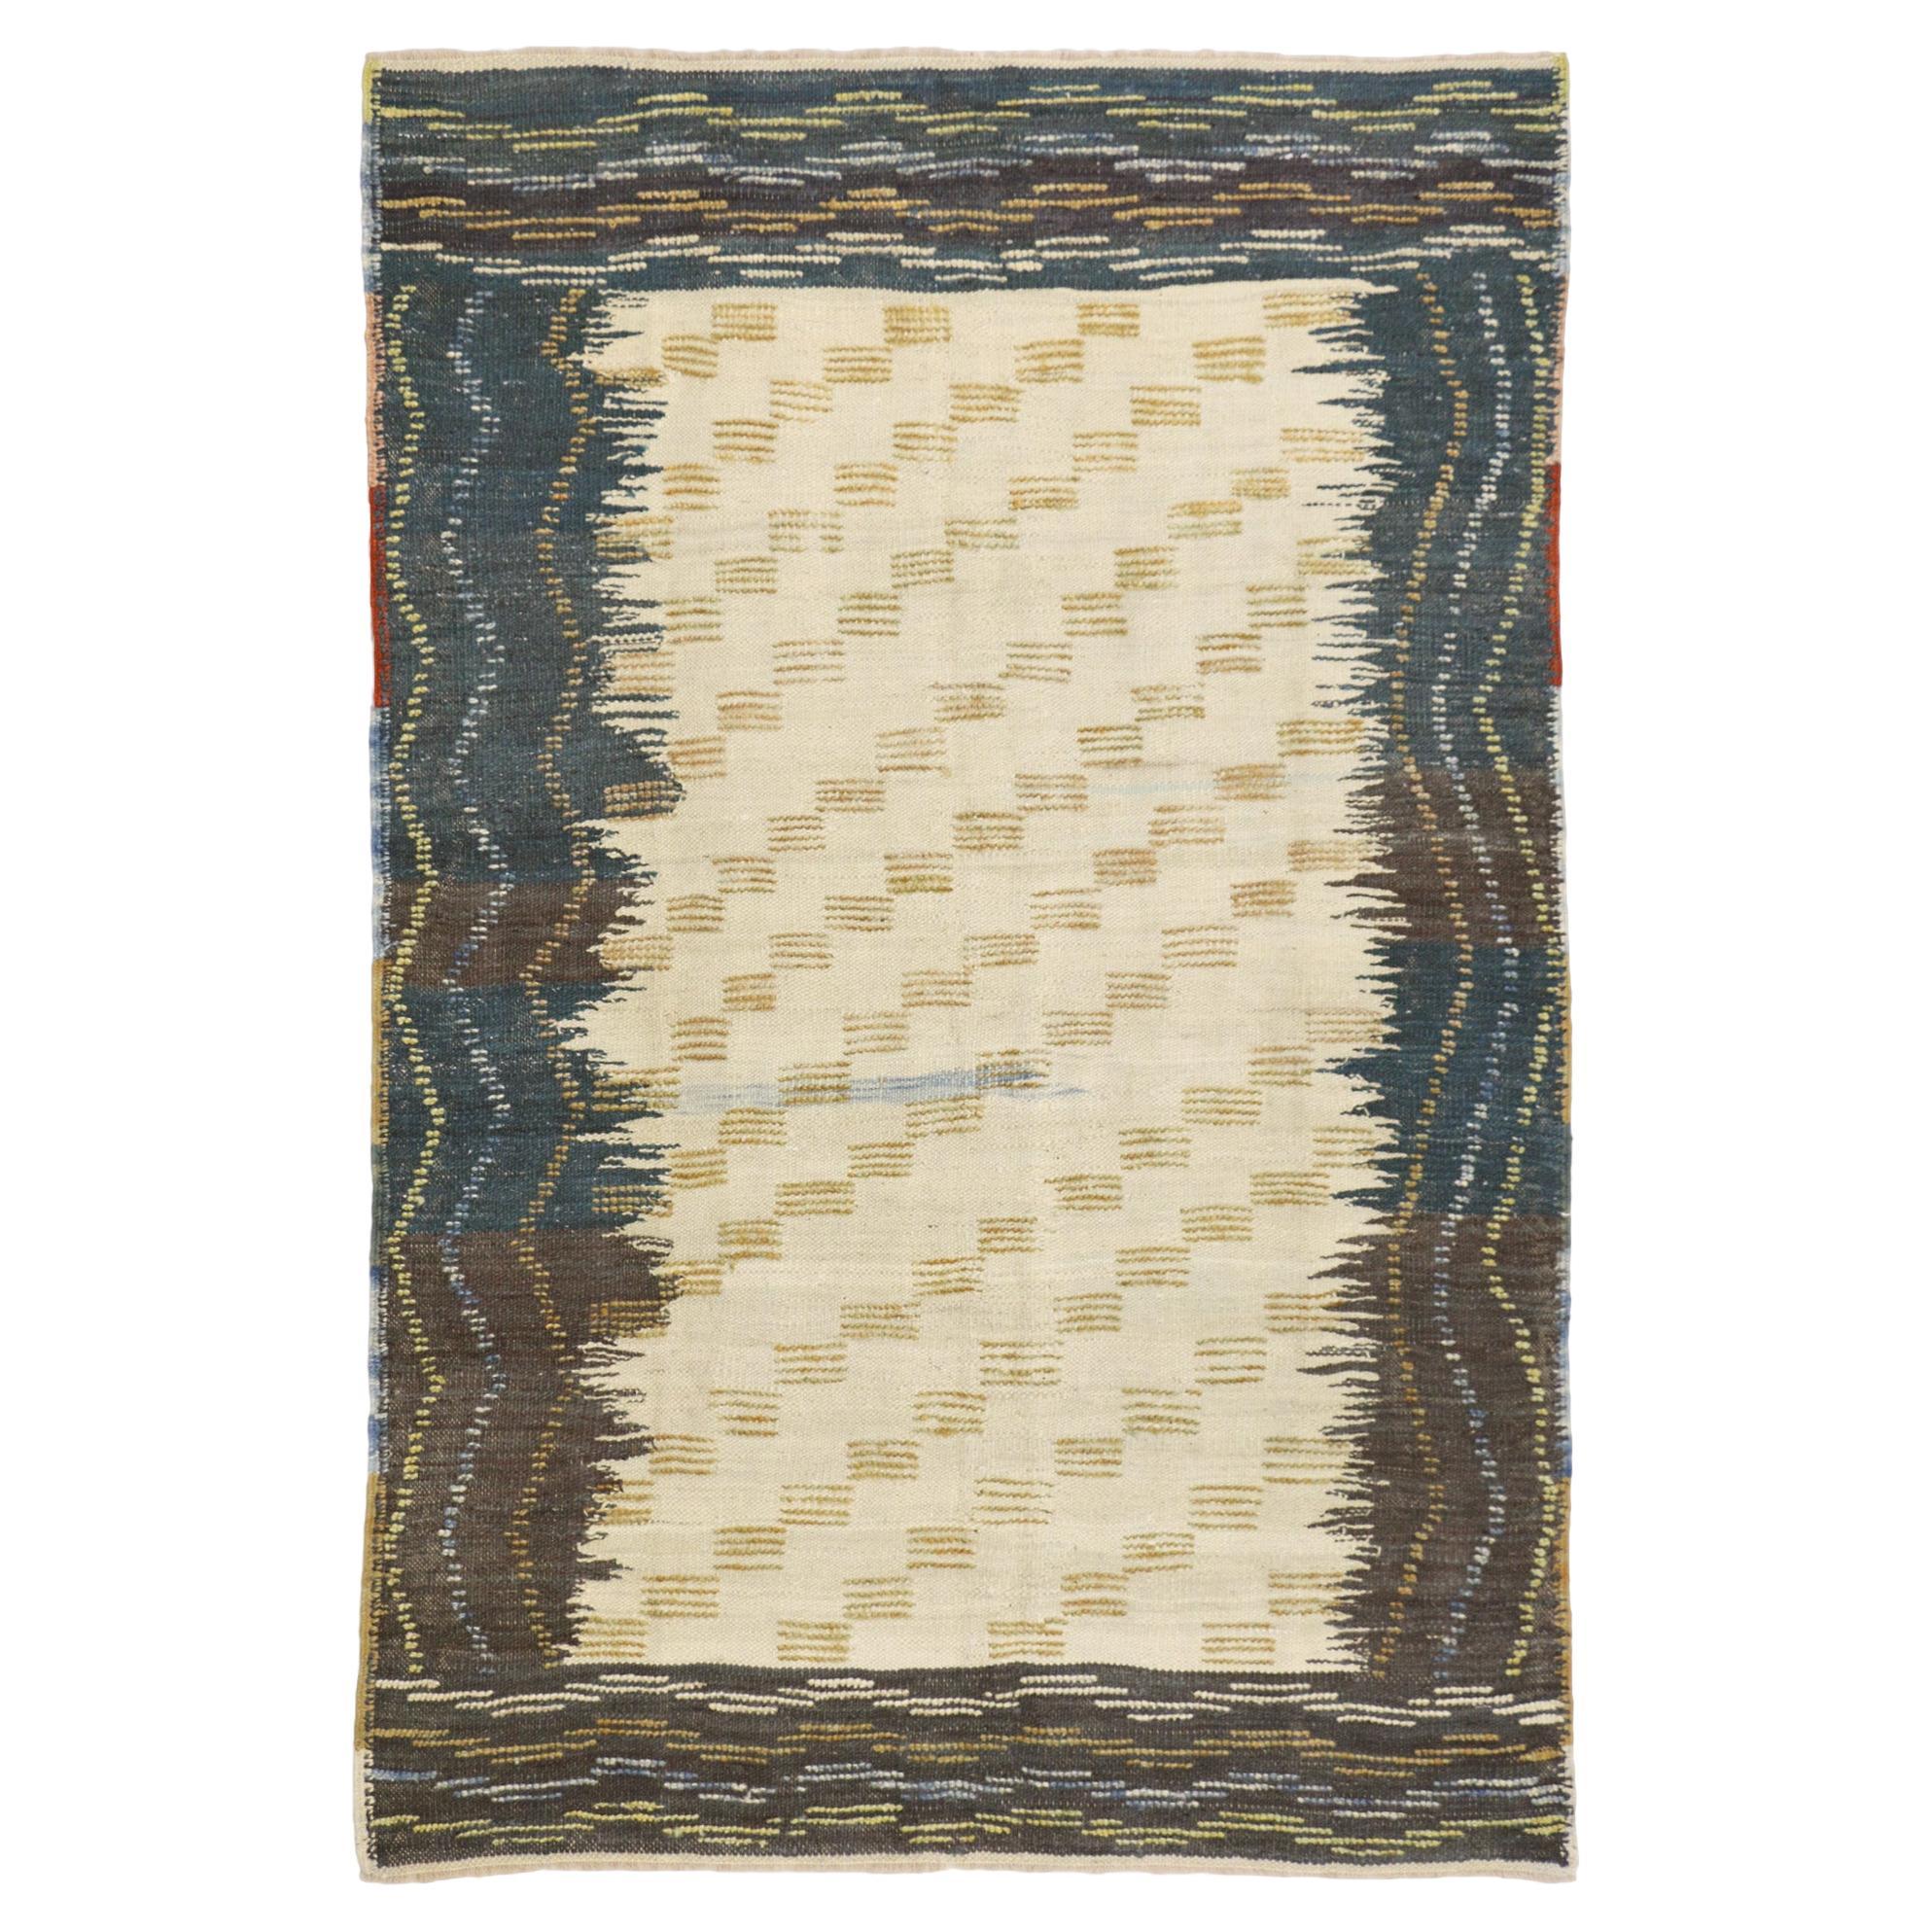 Textured Turkish Kilim Rug with Modern Style For Sale